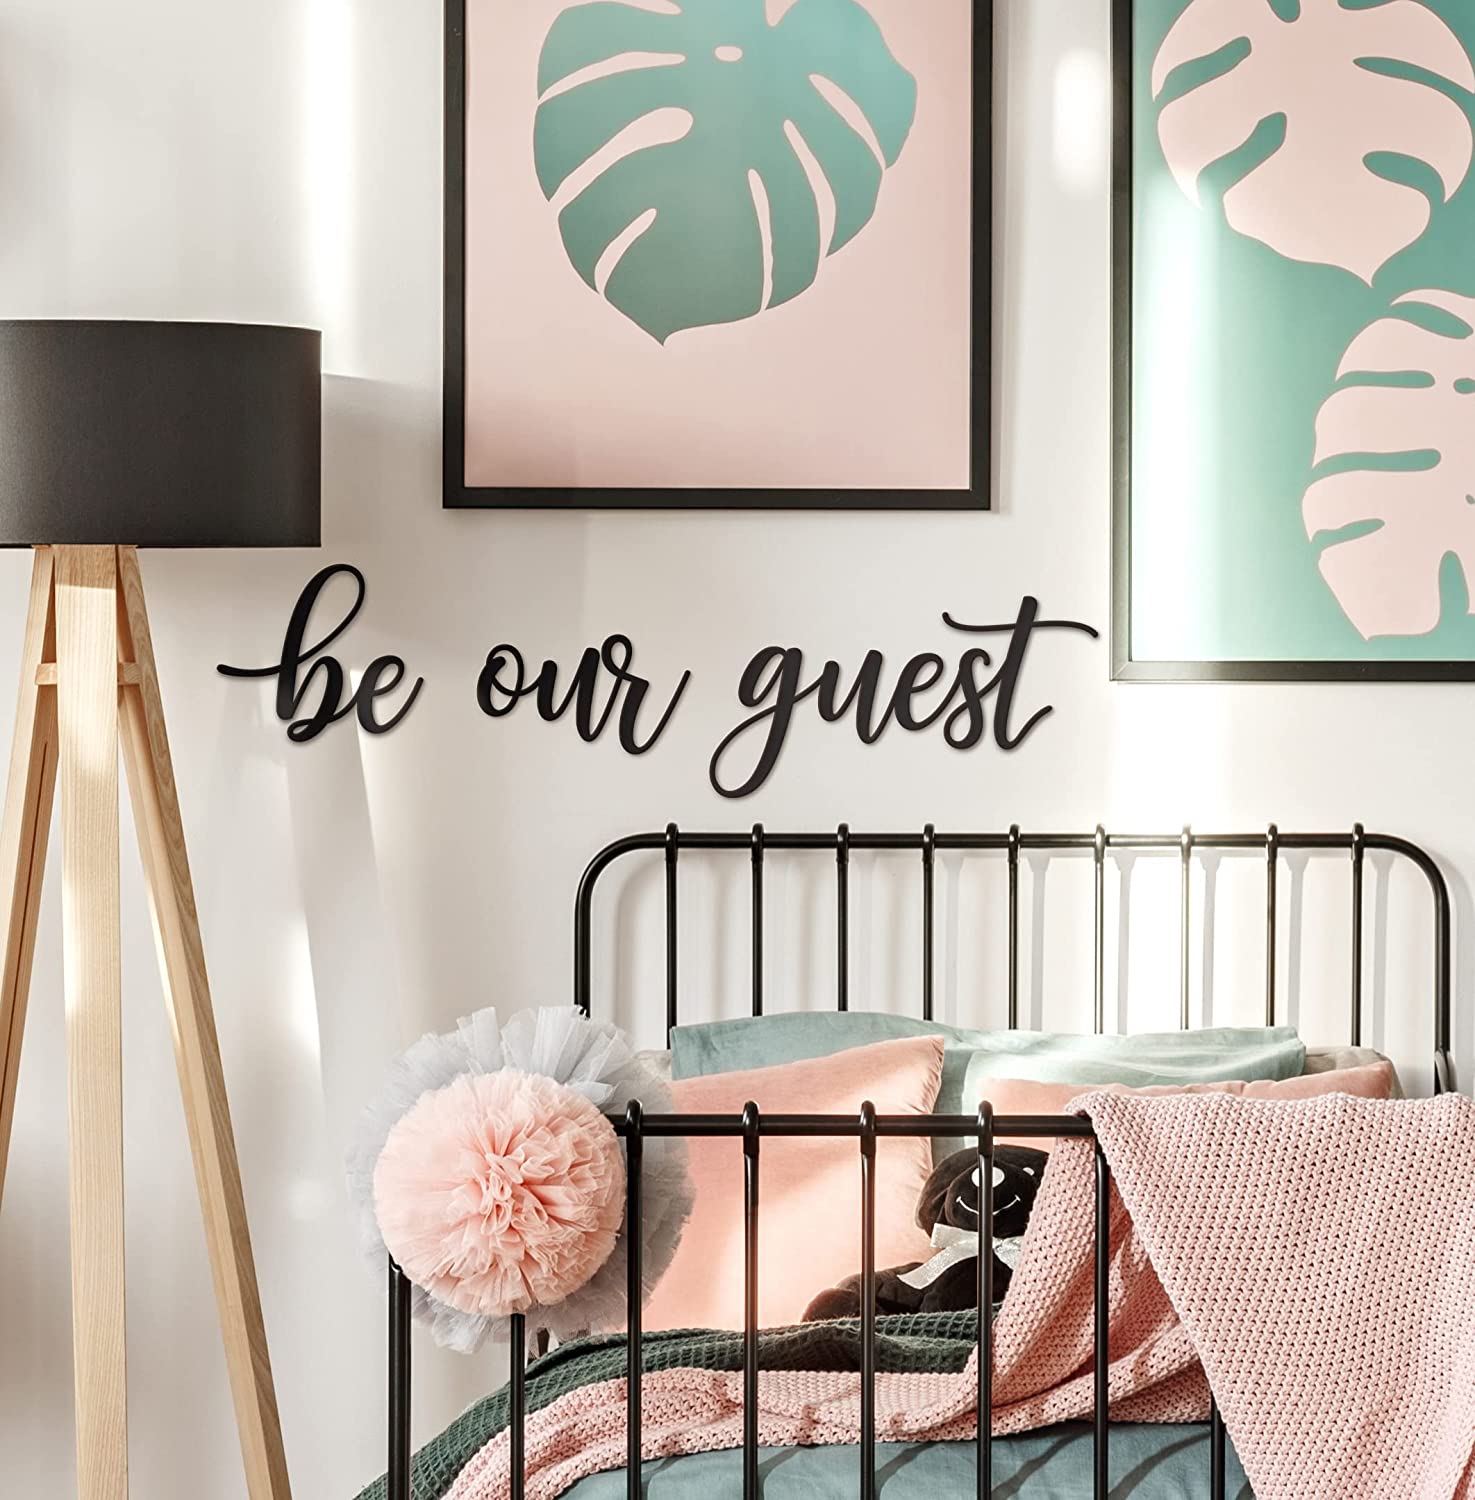 Be Our Guest Sign Metal Wall Art Decor - 43"X10" Black Ideas Be Our Guest Farmhouse Metal Wall Signs